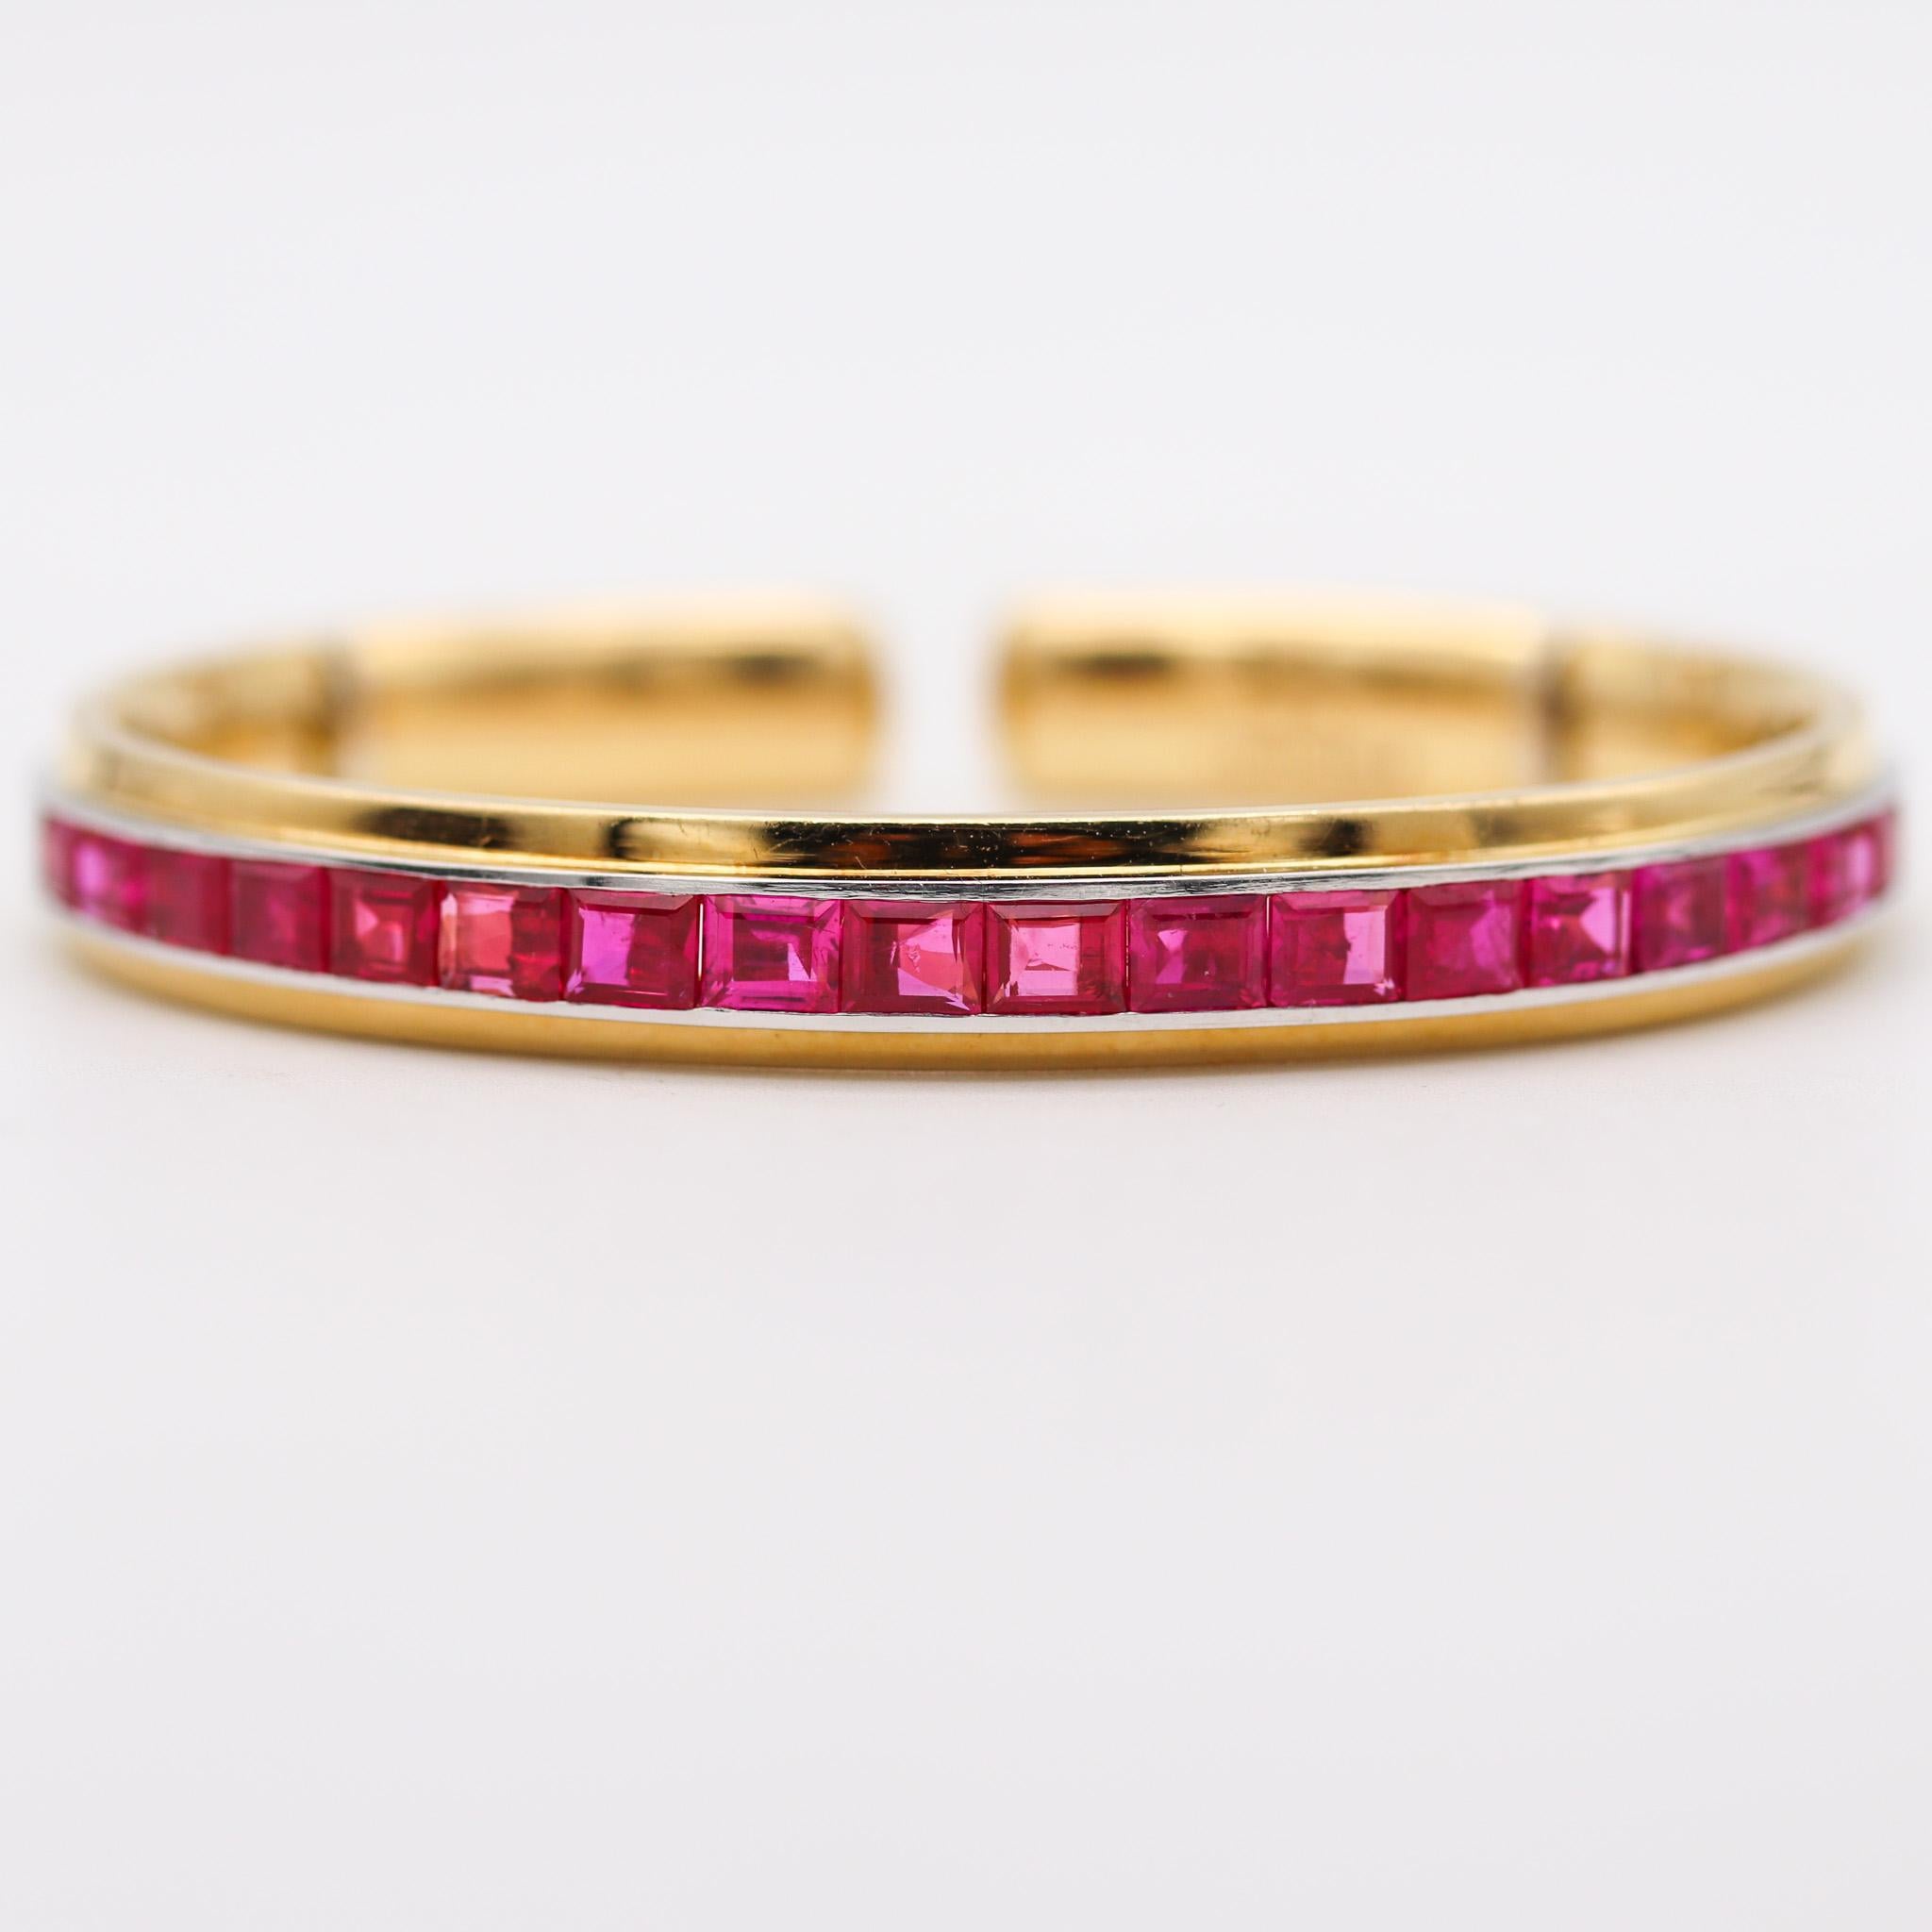 Modernist Hemmerle Bangle Bracelet In 18Kt Gold And Platinum With 22.65 Ctw Red Rubies For Sale